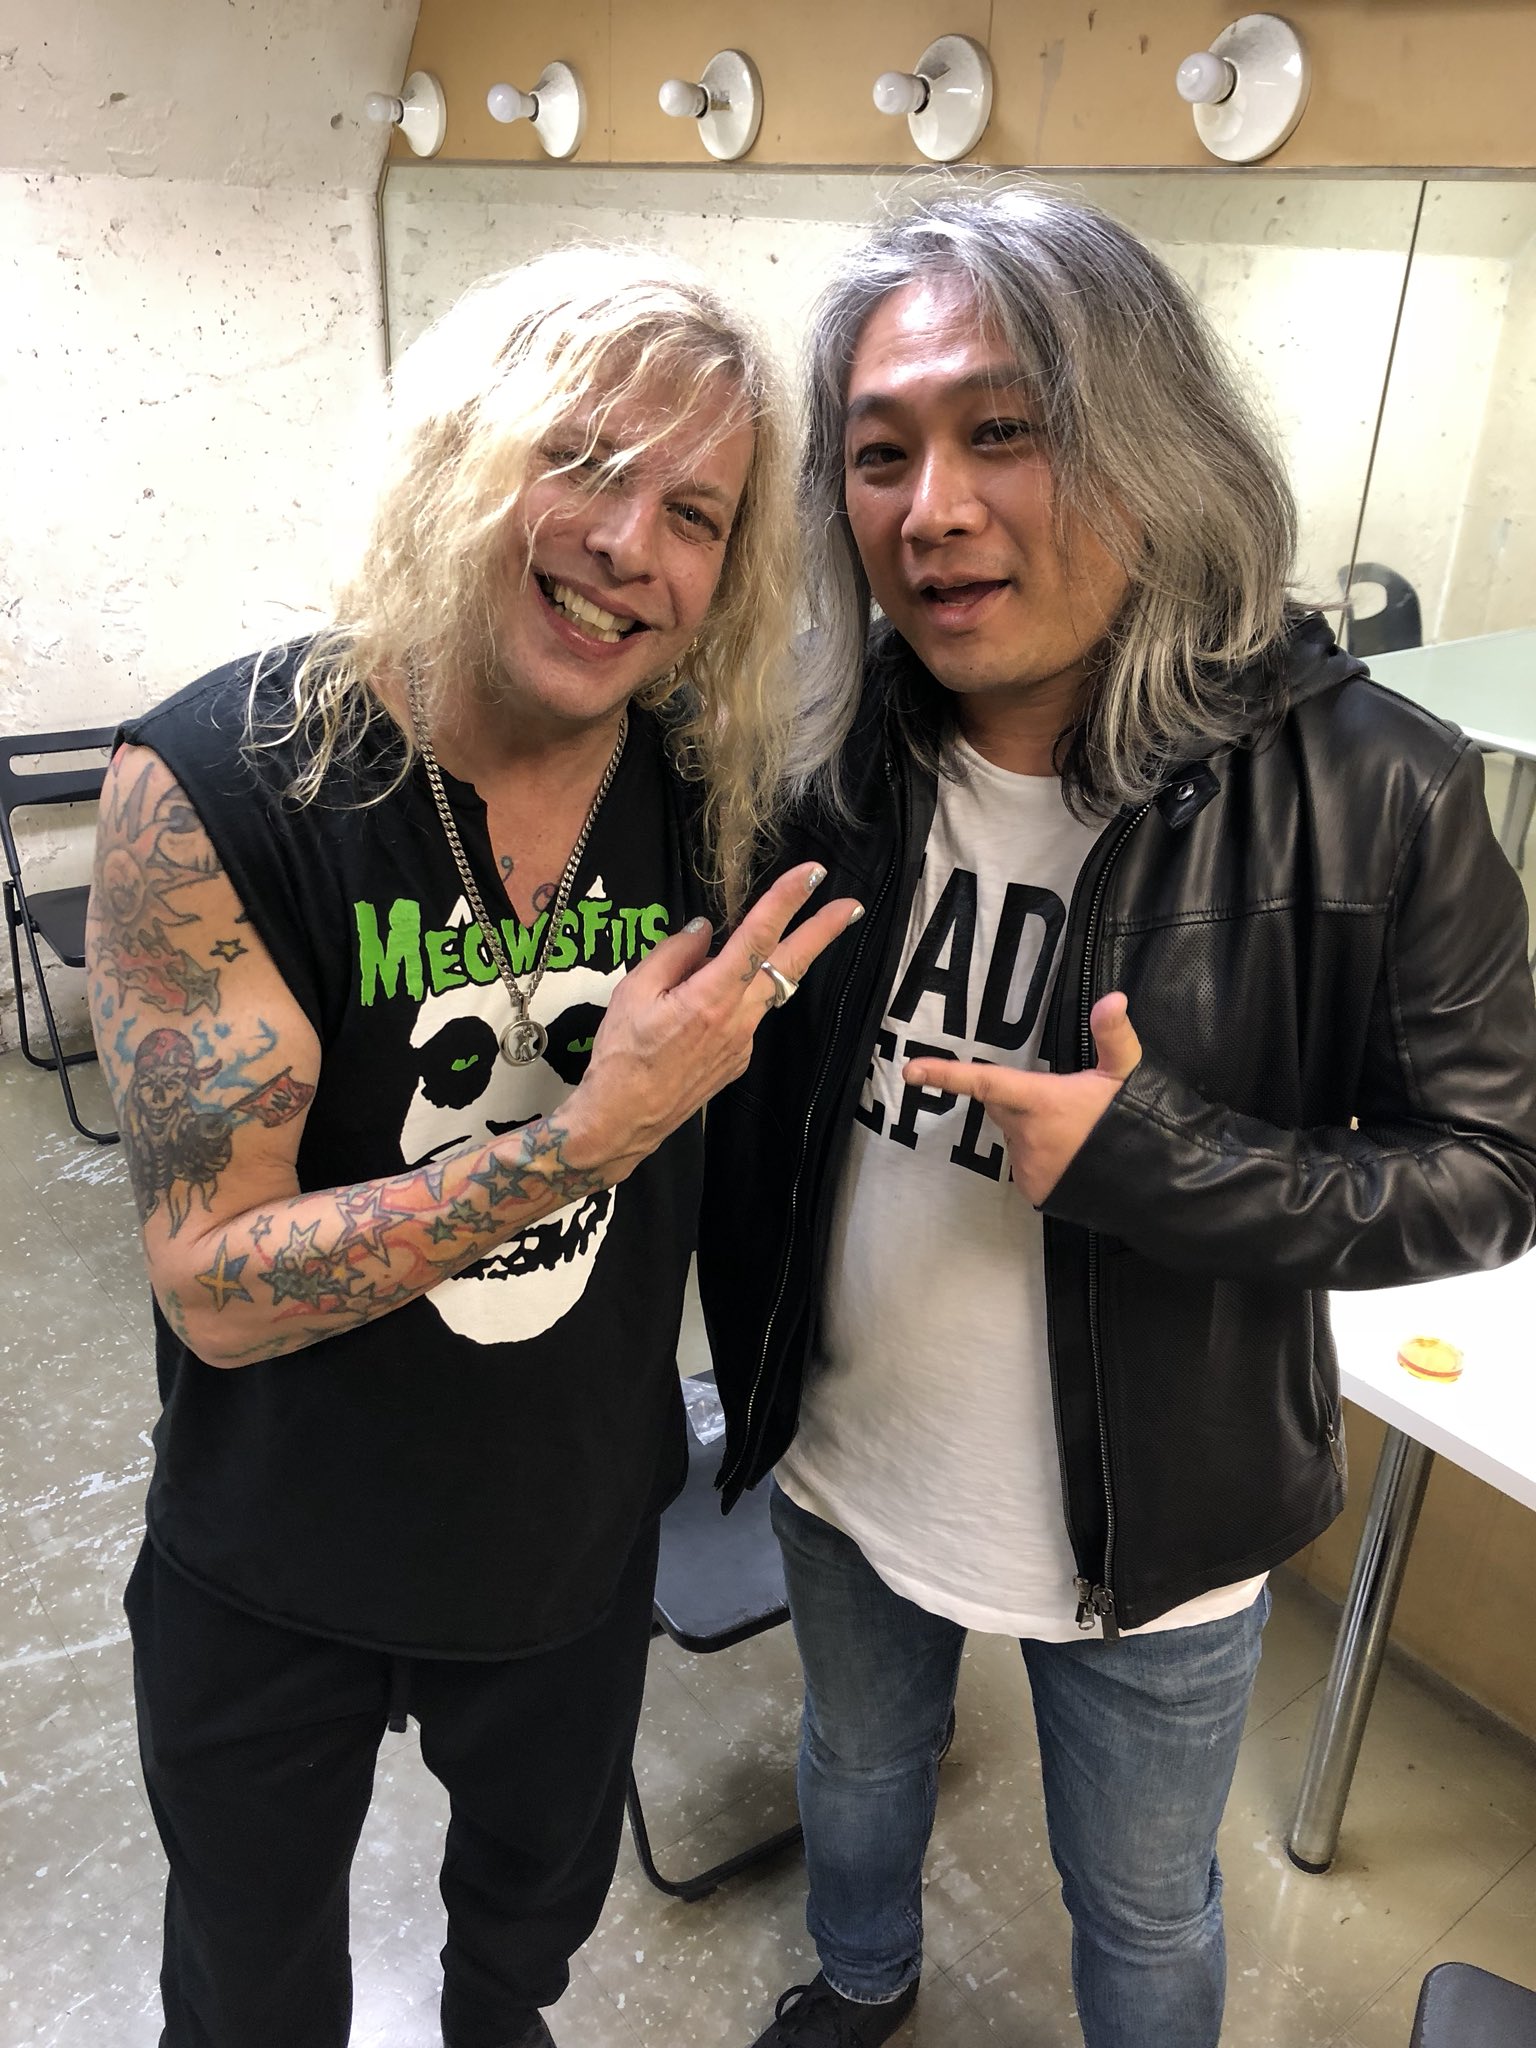 Crush40 昨日はdanger Dangerの東京公演で テッド ポーリーに会うなど Went To Danger Danger Show In Tokyo Last Night To See A Good Friend Of Mine Ted Poley T Co M0cige0idl Twitter